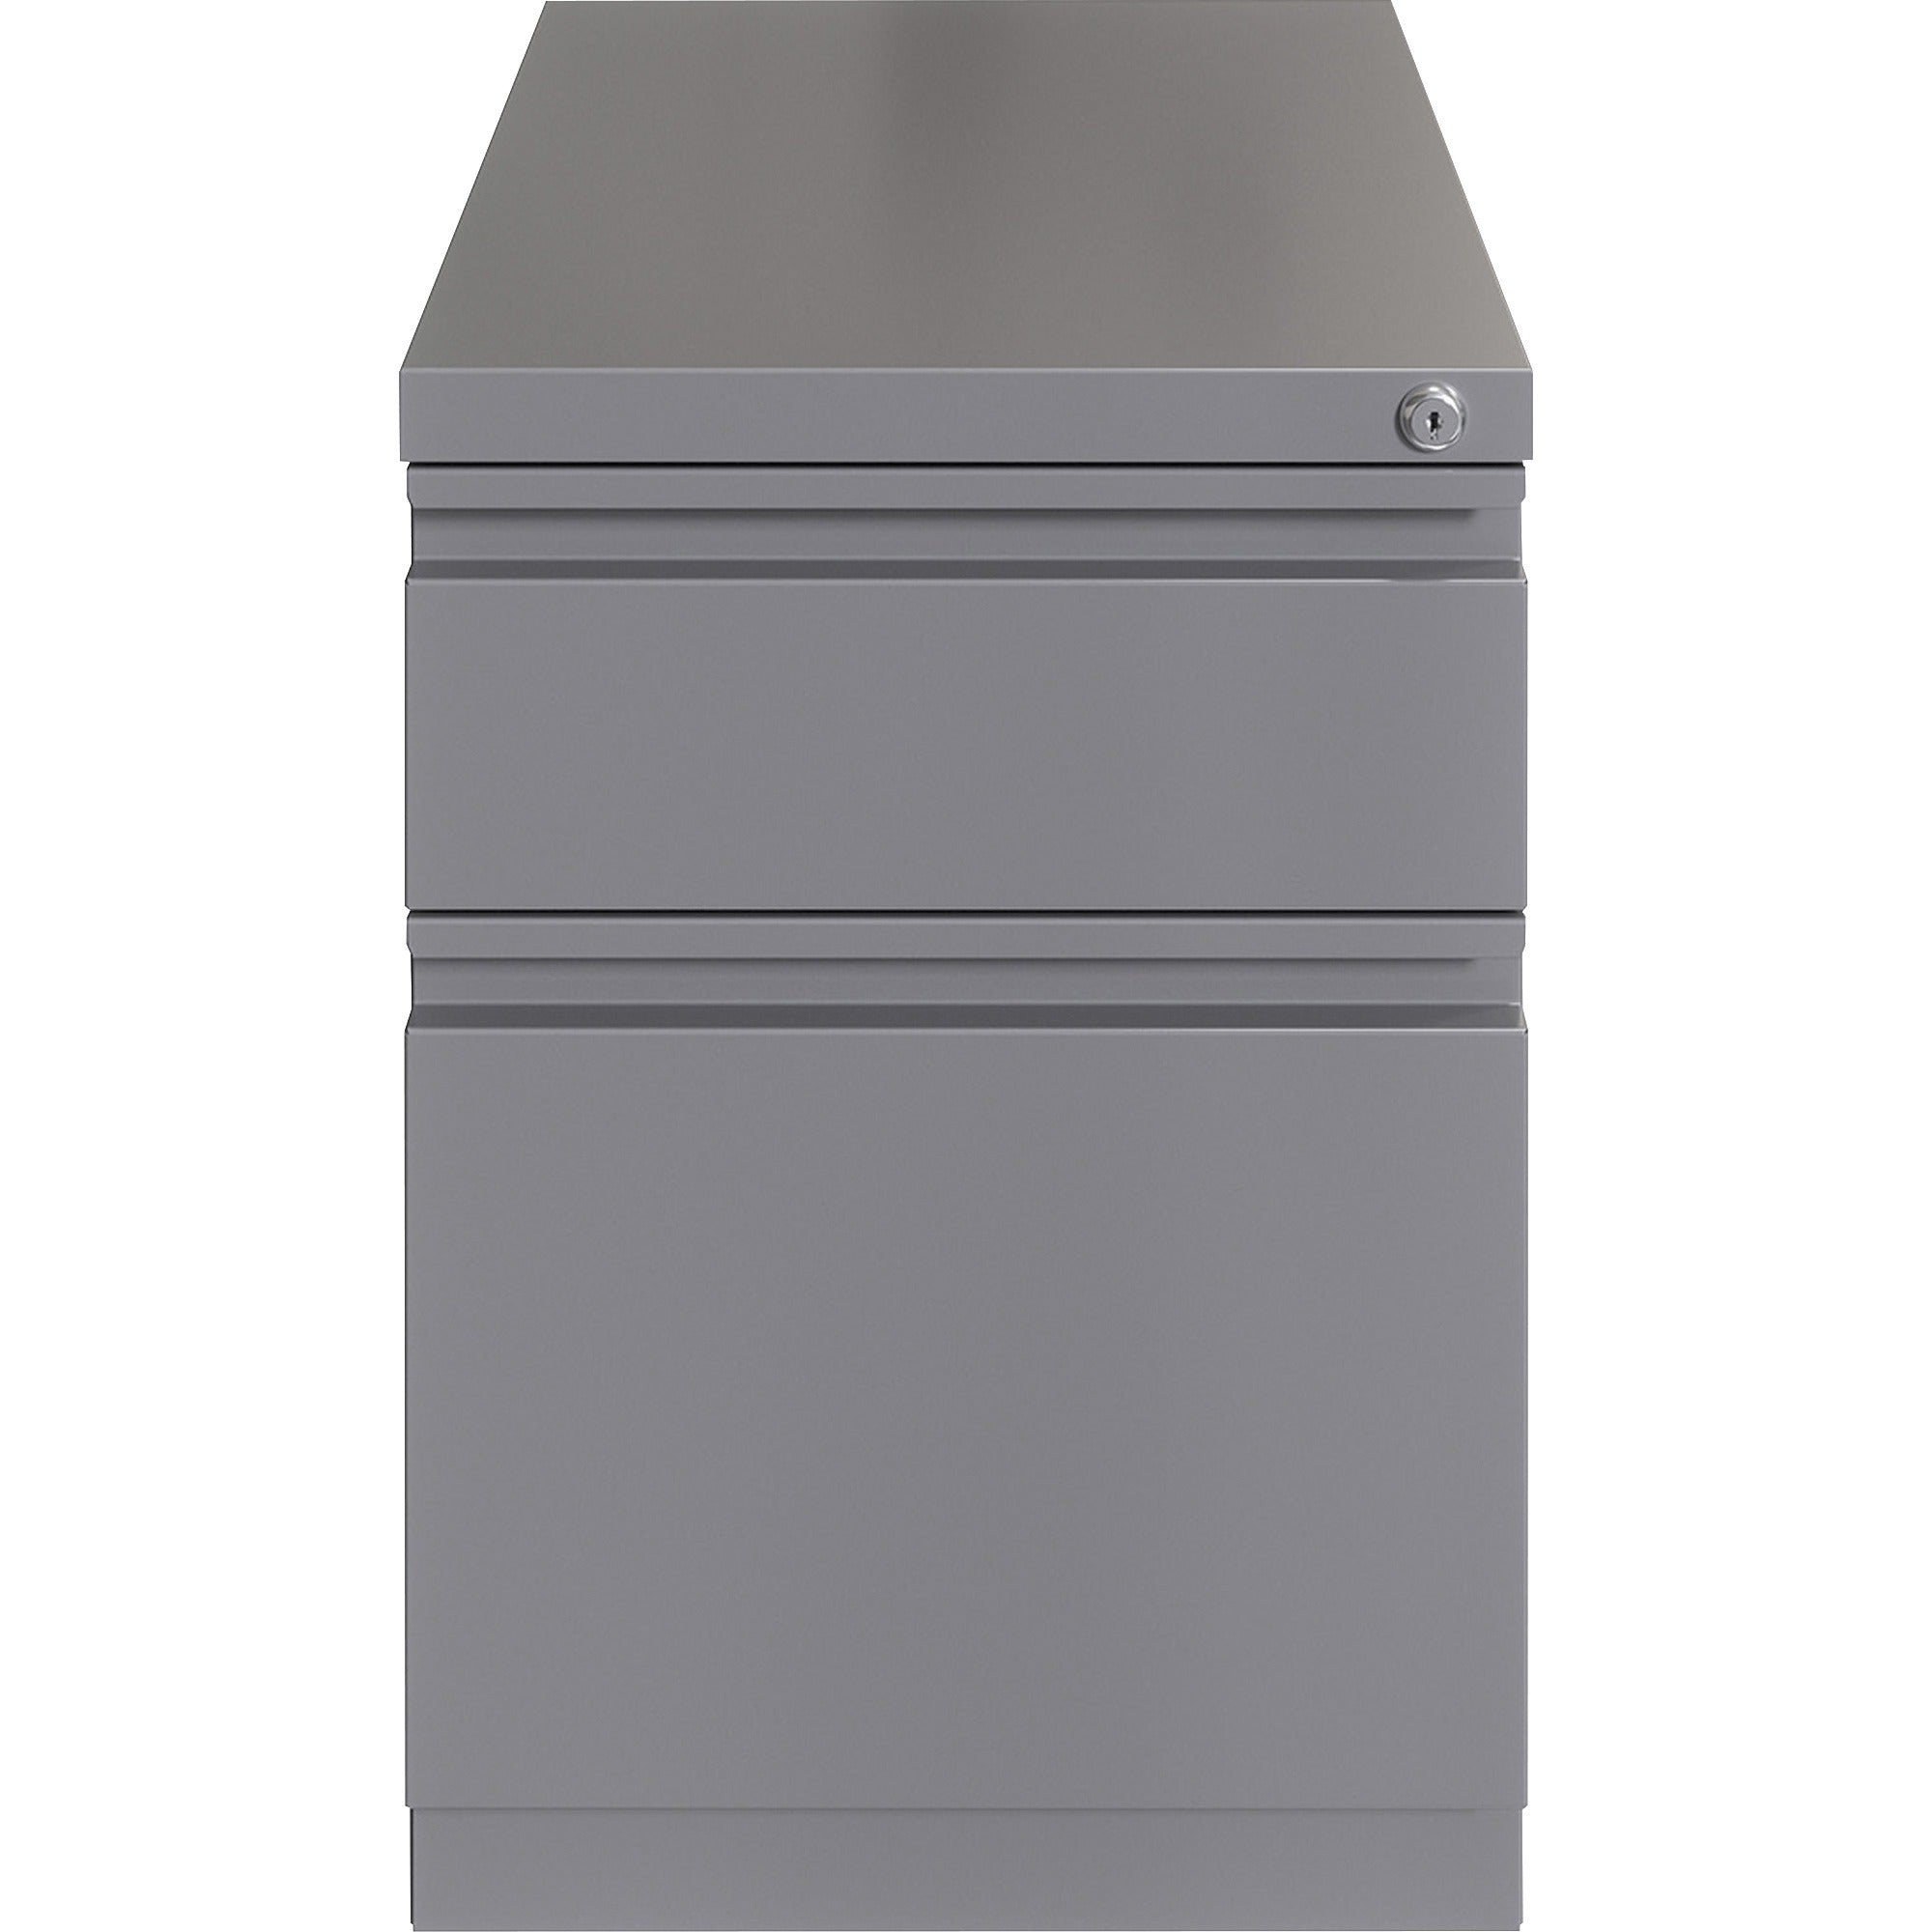 lorell-20-box-file-mobile-pedestal-15-x-199-x-238-for-box-file-letter-mobility-ball-bearing-suspension-removable-lock-pull-out-drawer-recessed-drawer-anti-tip-casters-key-lock-silver-steel-recycled_llr00054 - 3